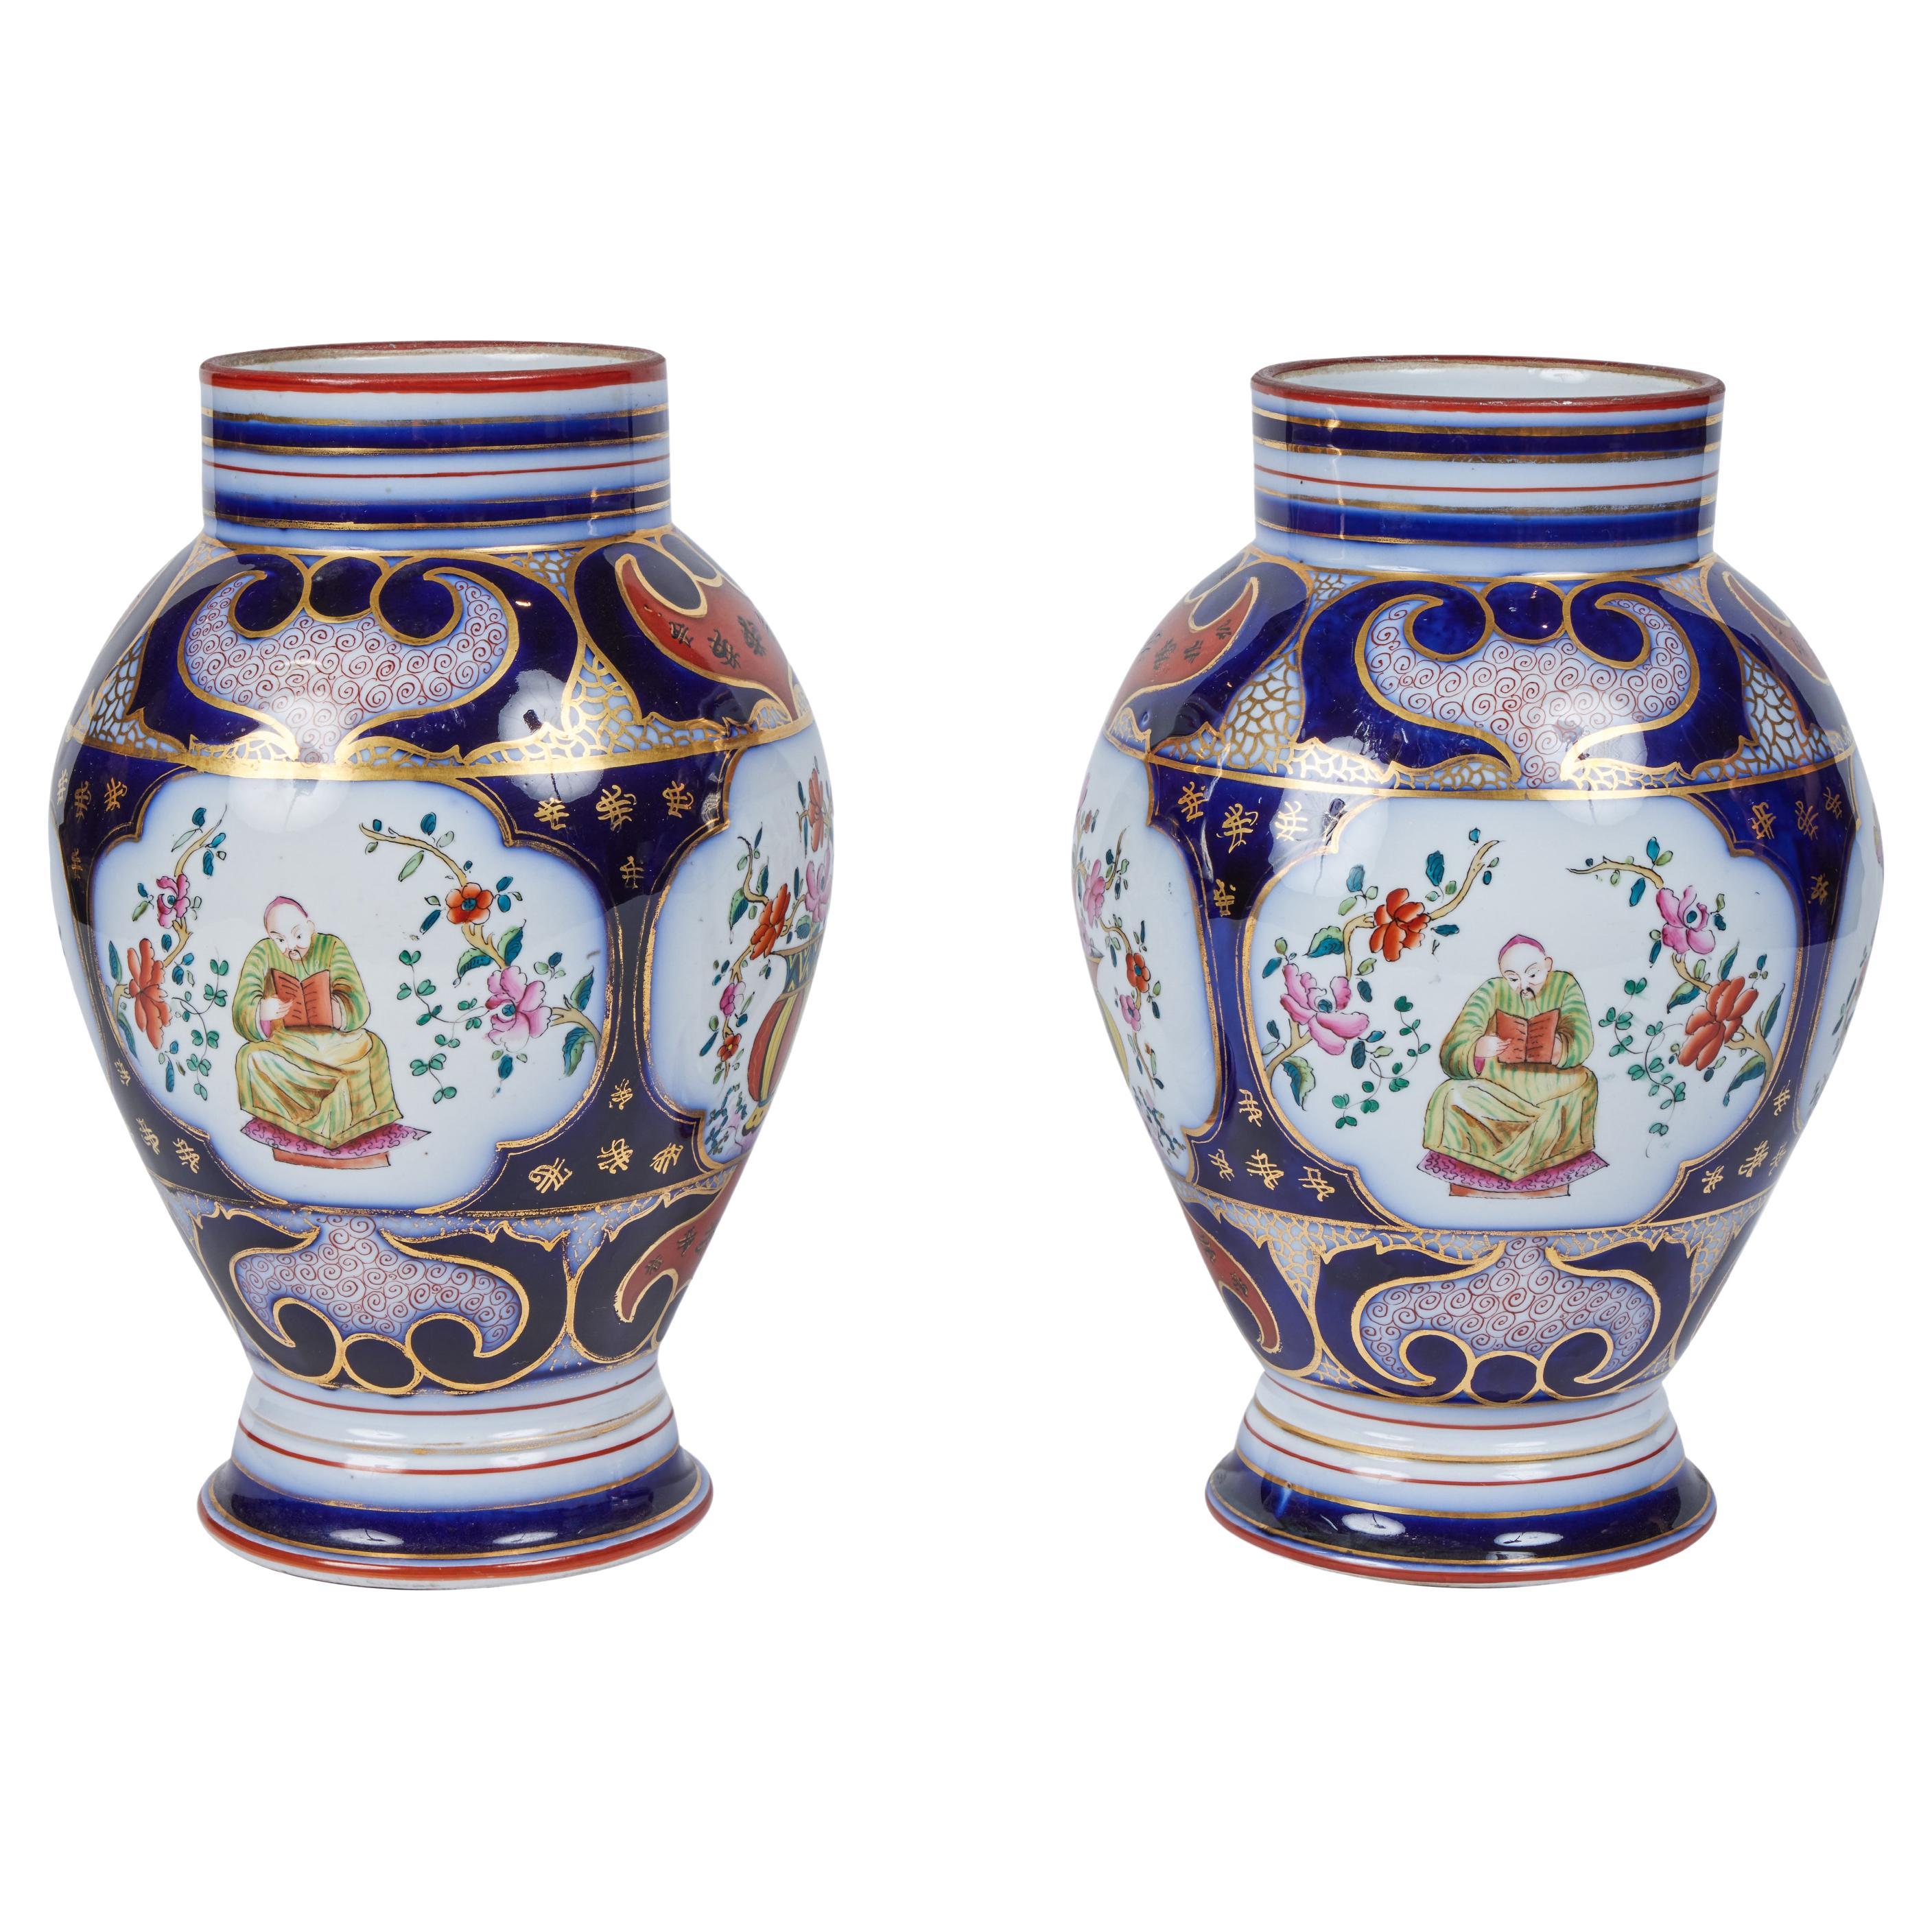 Pair of Porcelain Vases with Gilded Detail